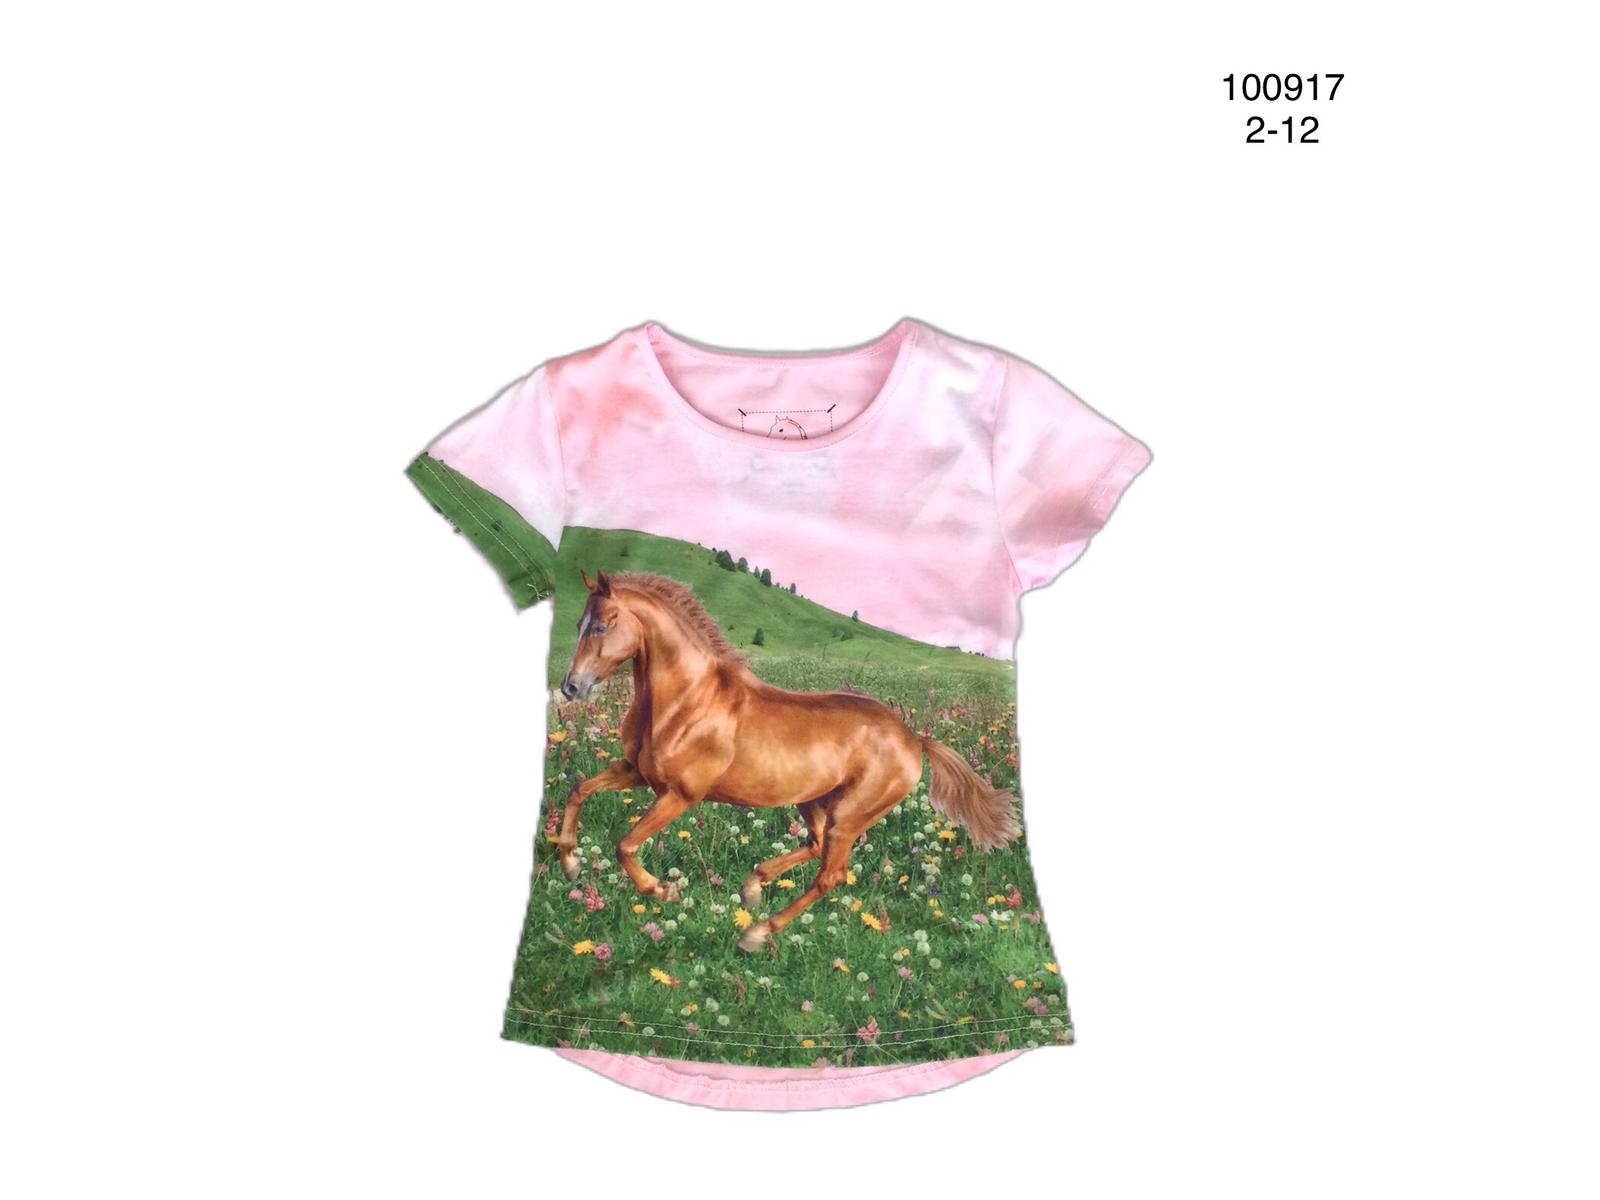 Pink shirt with horse